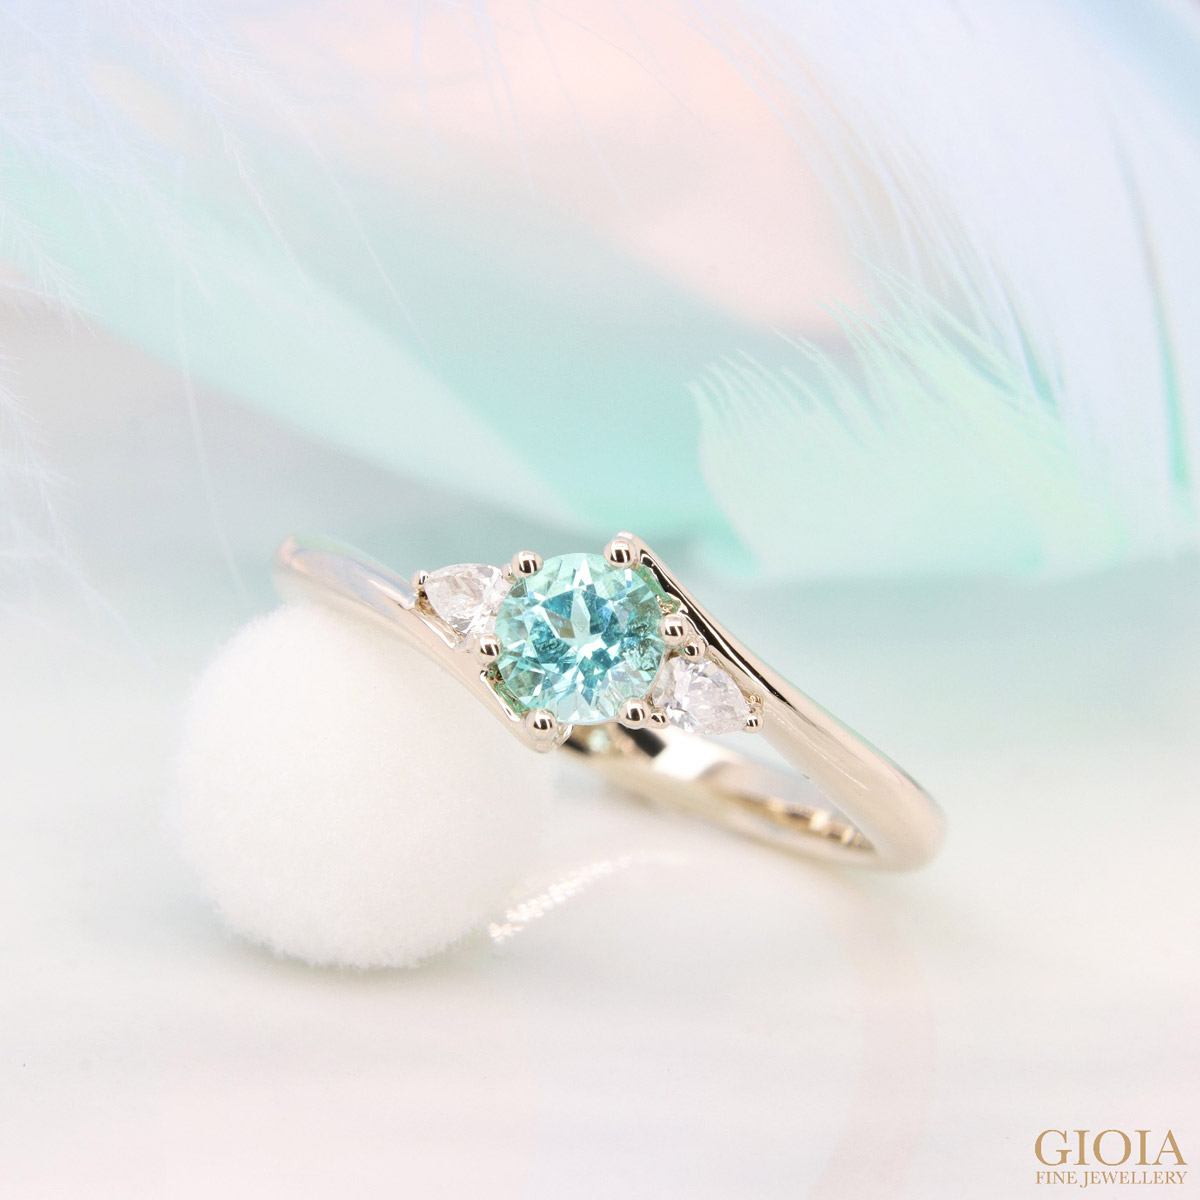 GIOIA Fine Jewellery: Create the Engagement Ring of Your Dreams Exactly How You Want It